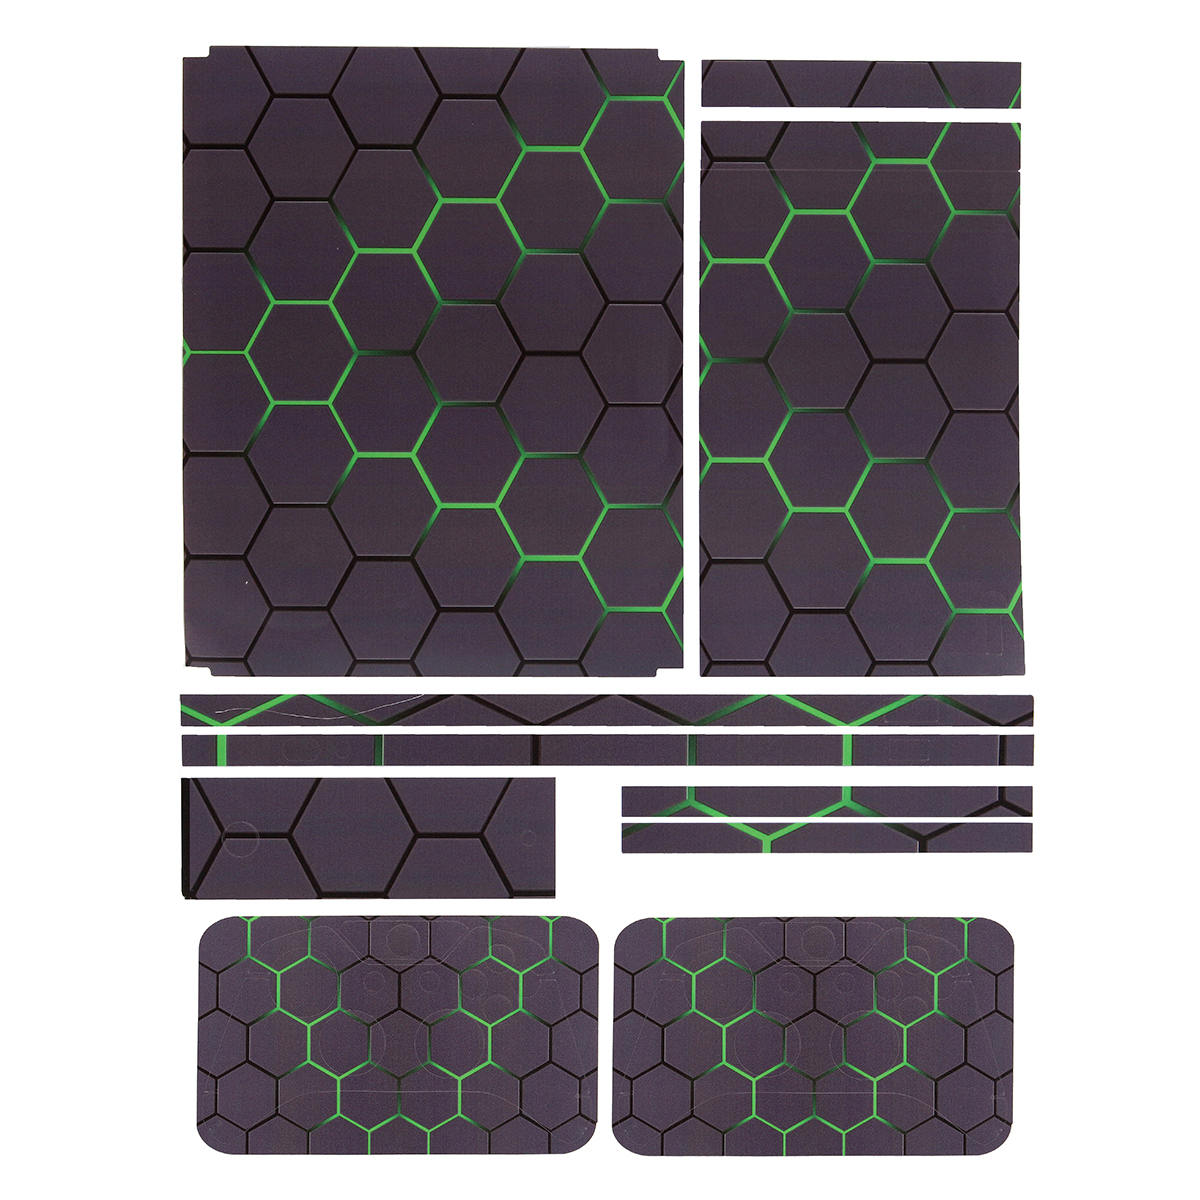 Green Grid Vinyl Decal Skin Stickers Cover for Xbox One S Game Console&2 Controllers 35